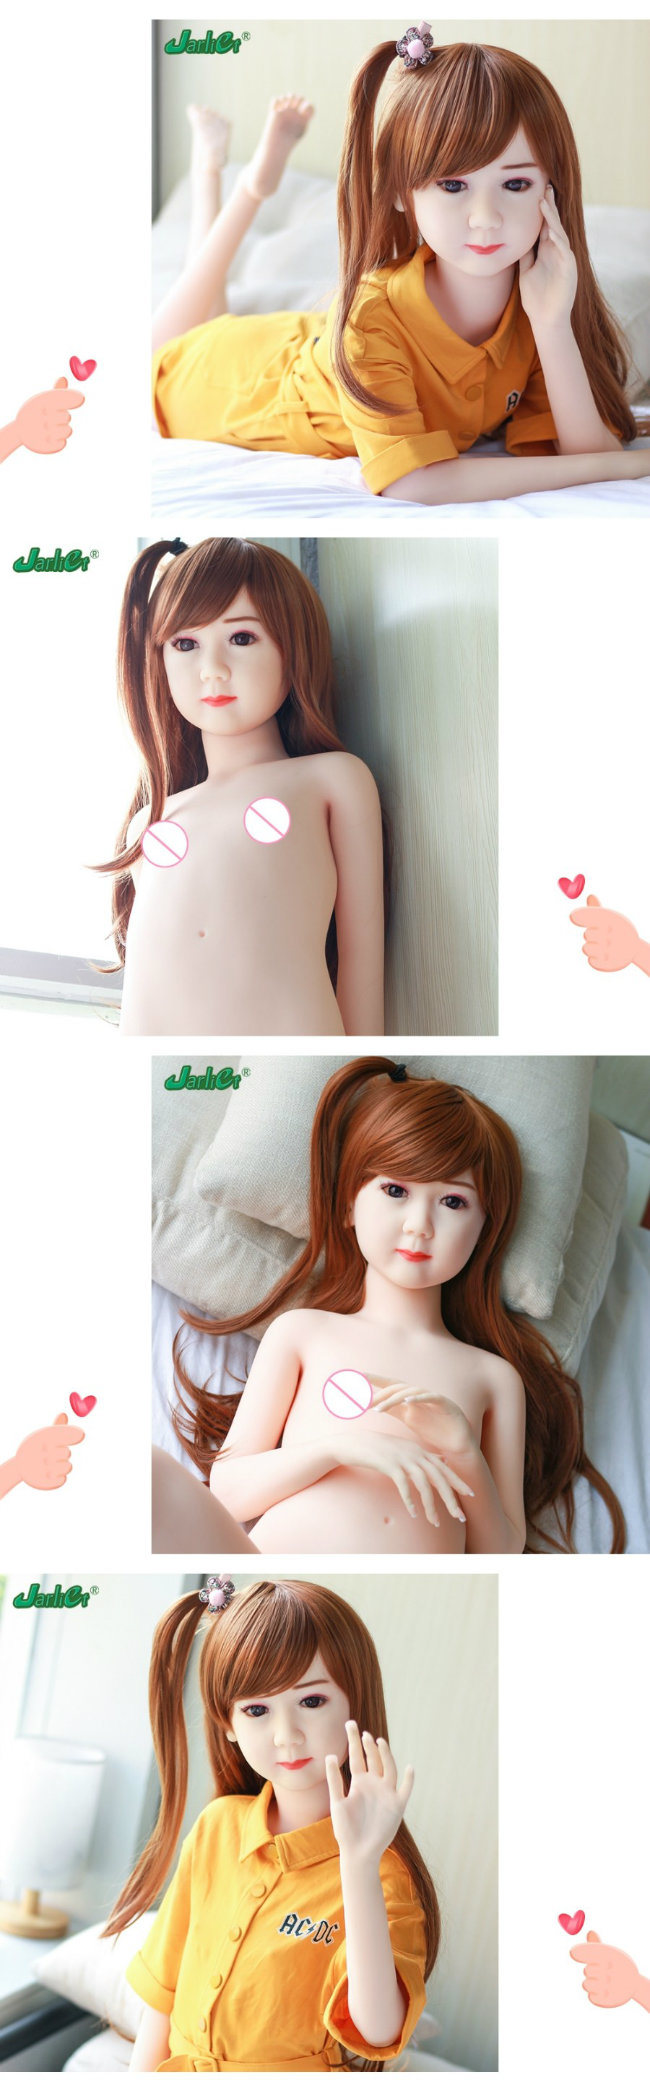 Jarliet Real TPE Sex Love Doll Silicone Sex Lifelike Doll for Man